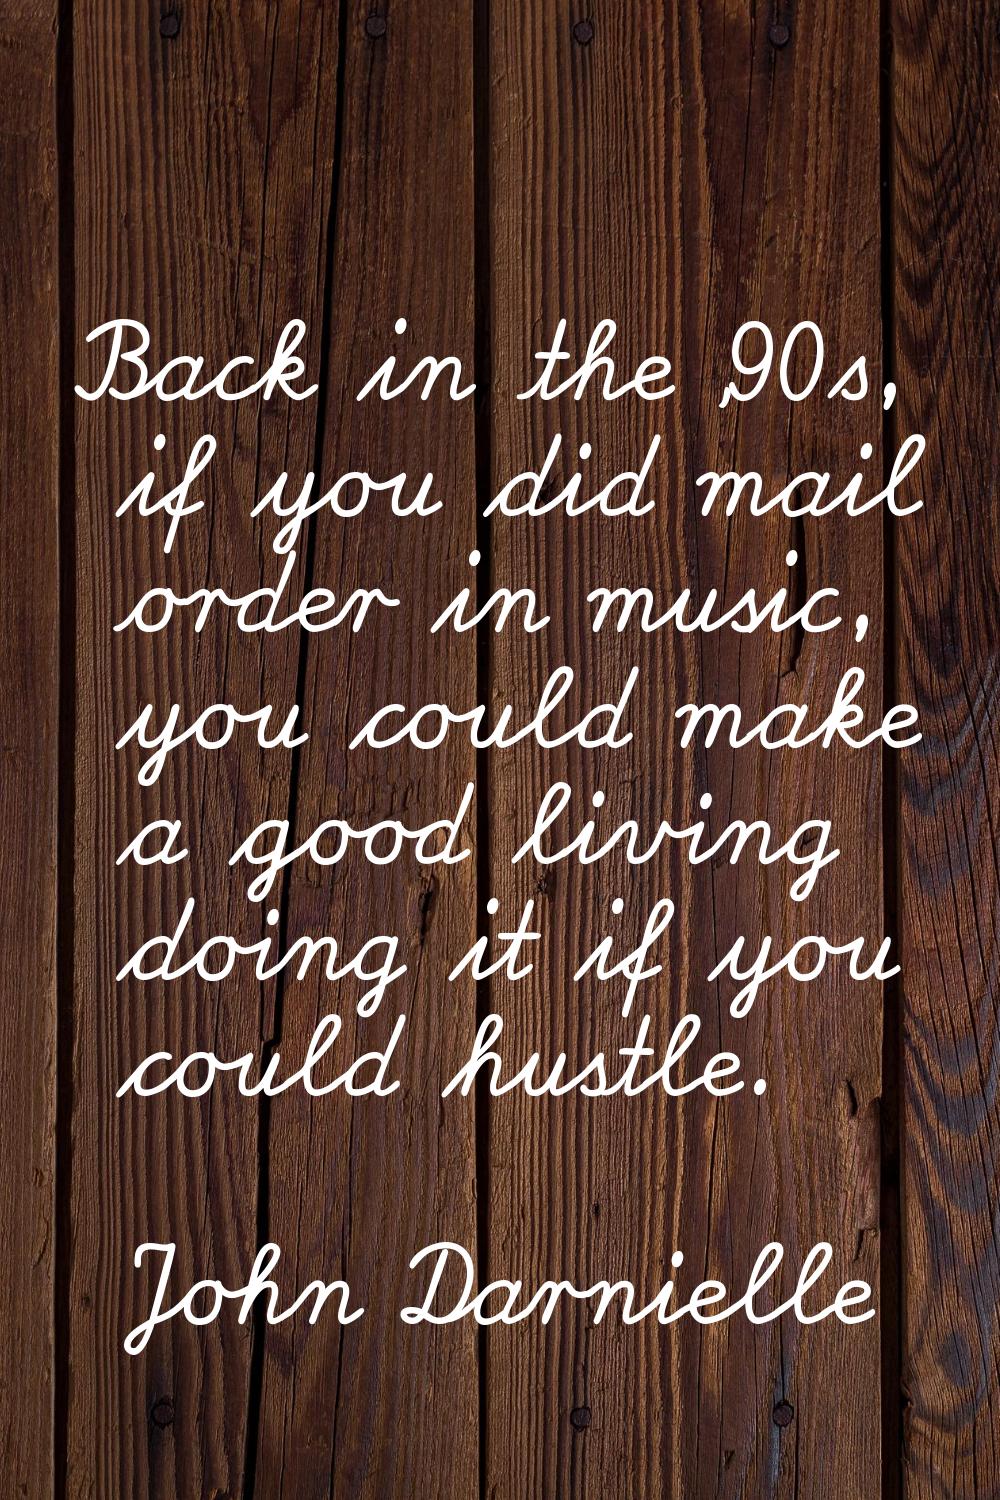 Back in the '90s, if you did mail order in music, you could make a good living doing it if you coul